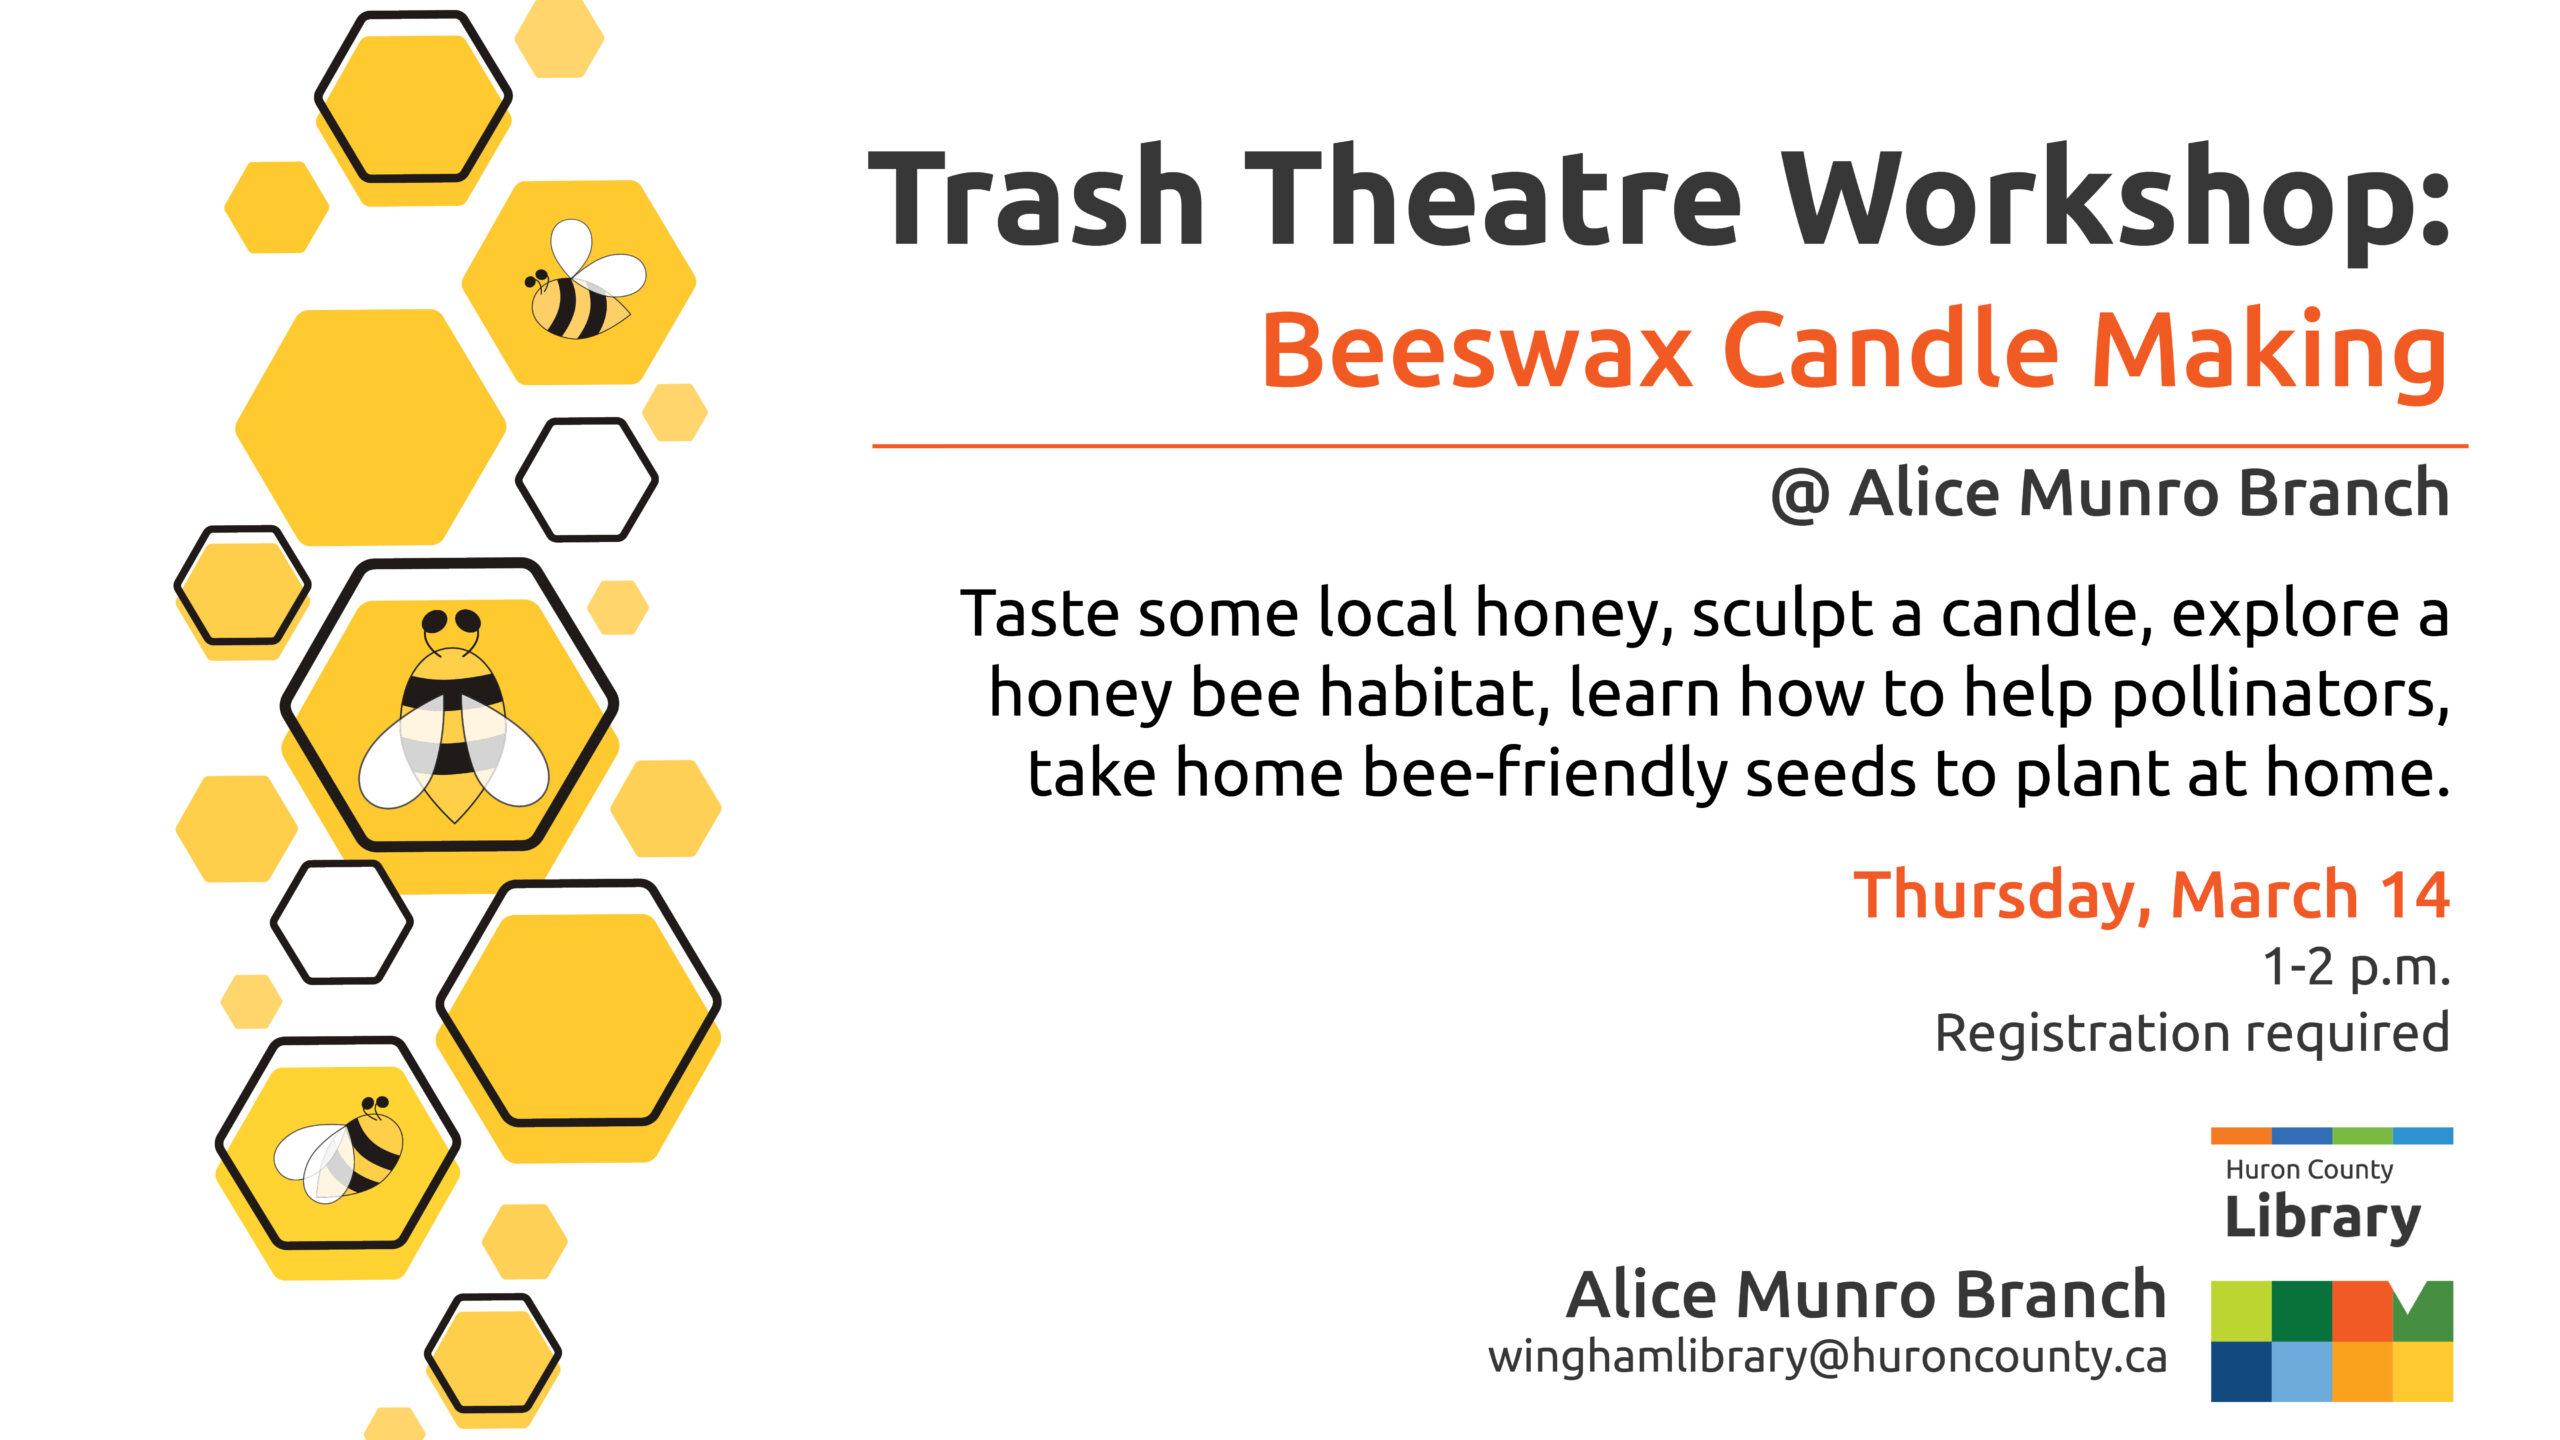 Illustration of bees with text promoting beeswax candle making and more at the Alice Munro Branch, Wingham